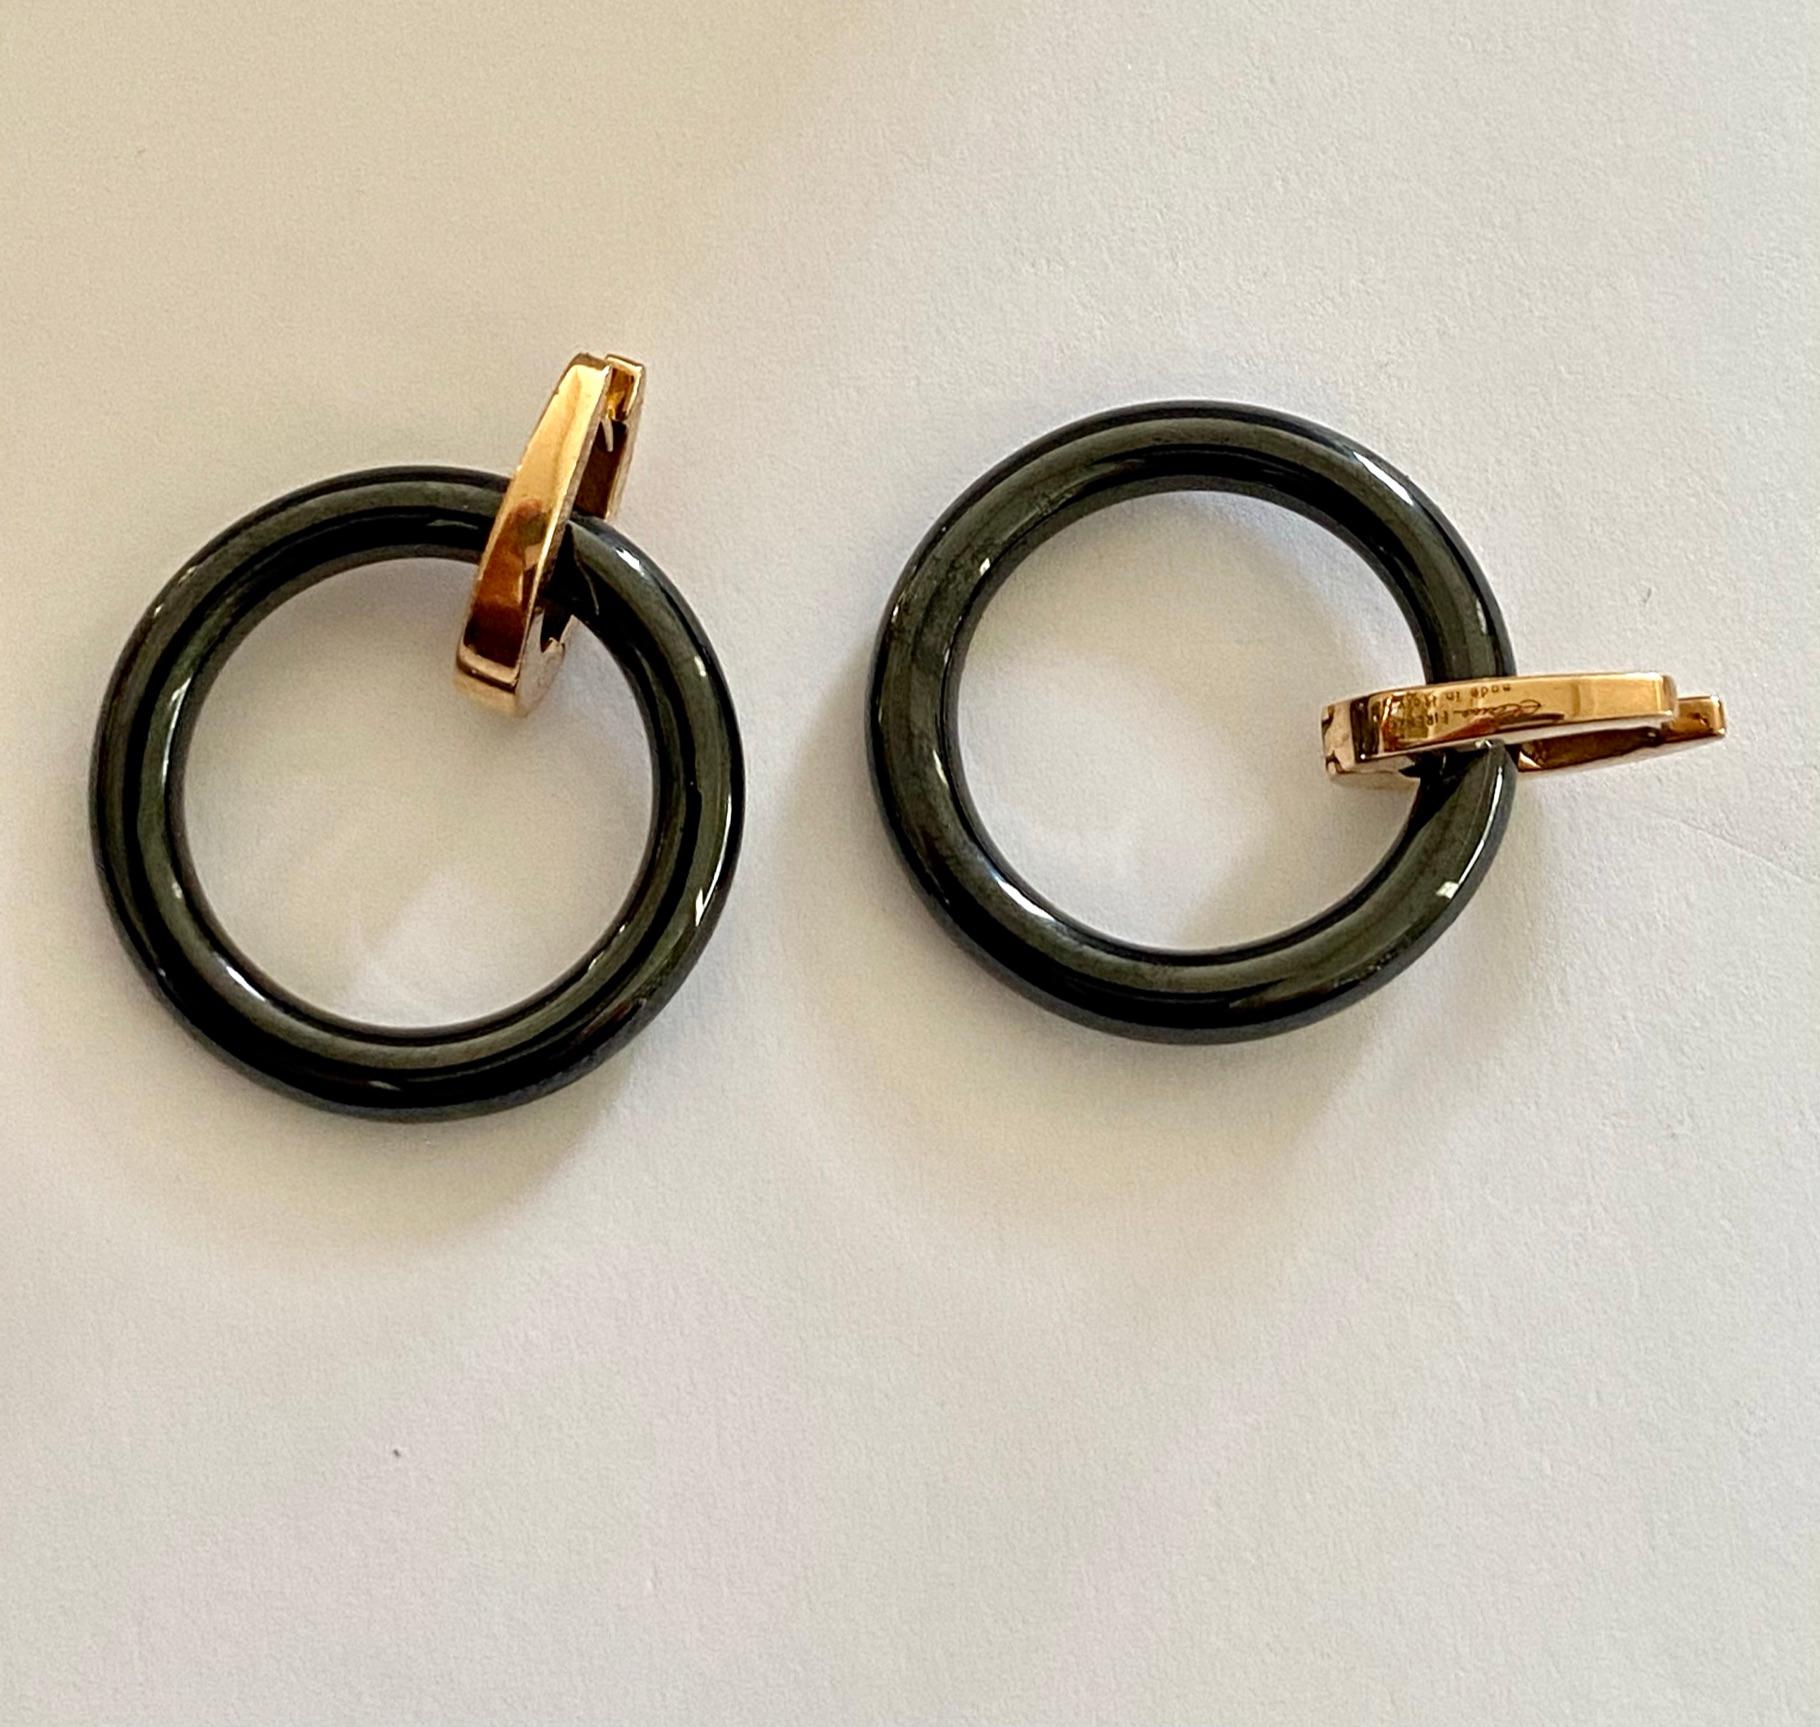 One (1) pair of 14K. rose gold oval creoles, to which a black round ceramic ring is attached.
signed: Elaine Firenze, made in Italy.
dimensions oval hoop: 14 x 11 x 2 mm
size of round ceramic ring: diameter 24 mm, thickness: 3 mm
Weight Gold: 2.88